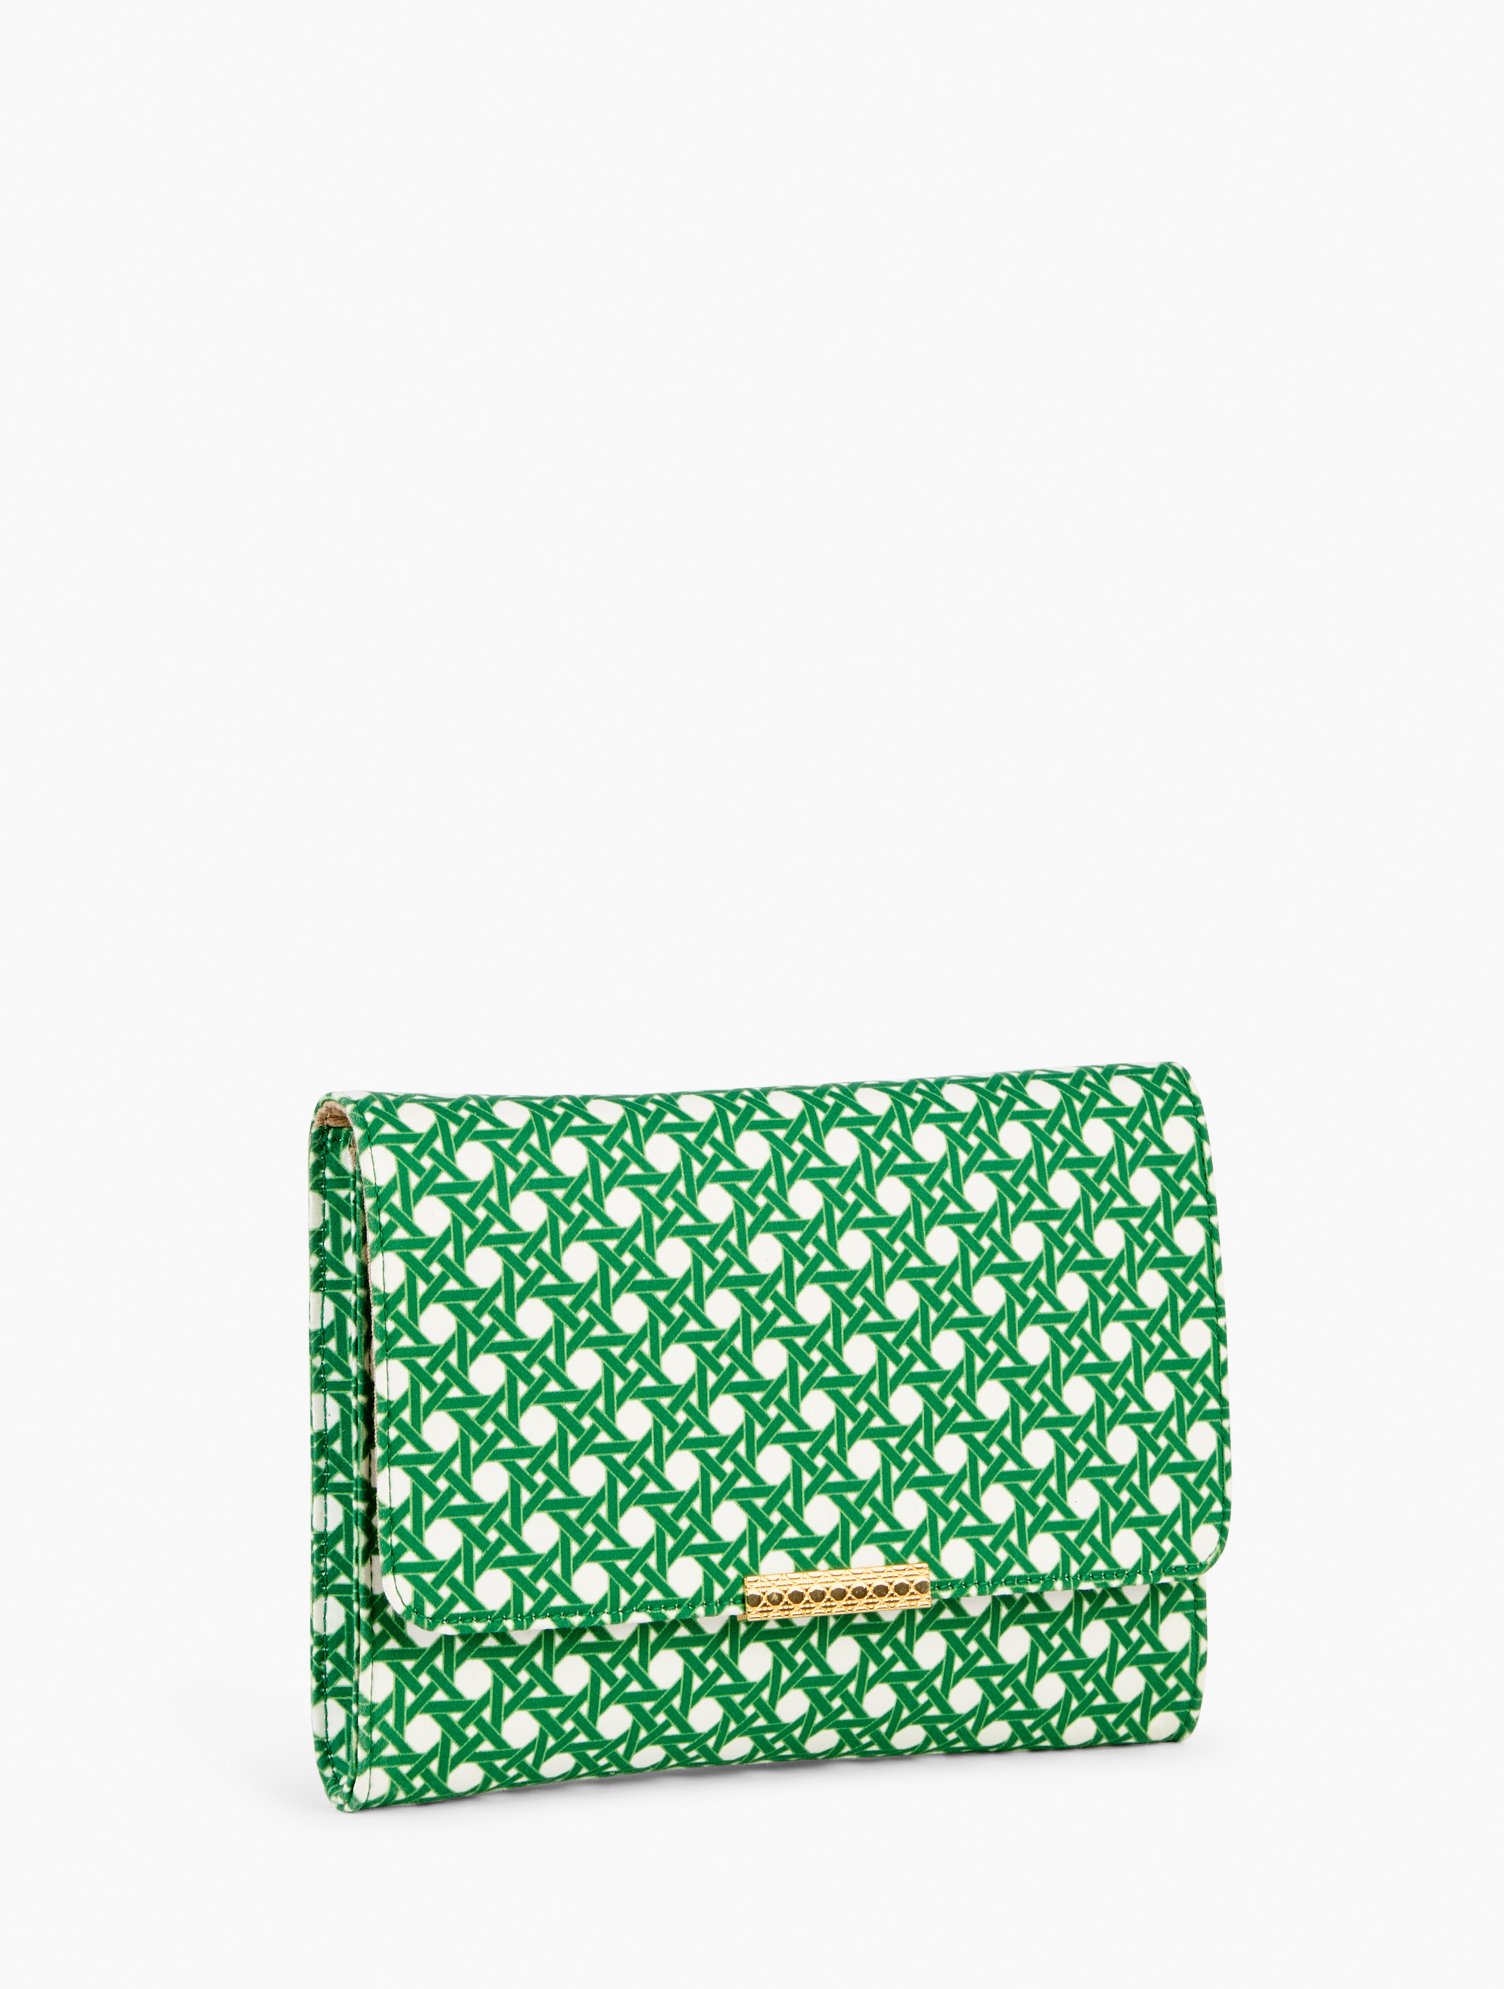 Talbots Intricate Dots Sateen Clutch - Ivory - 001